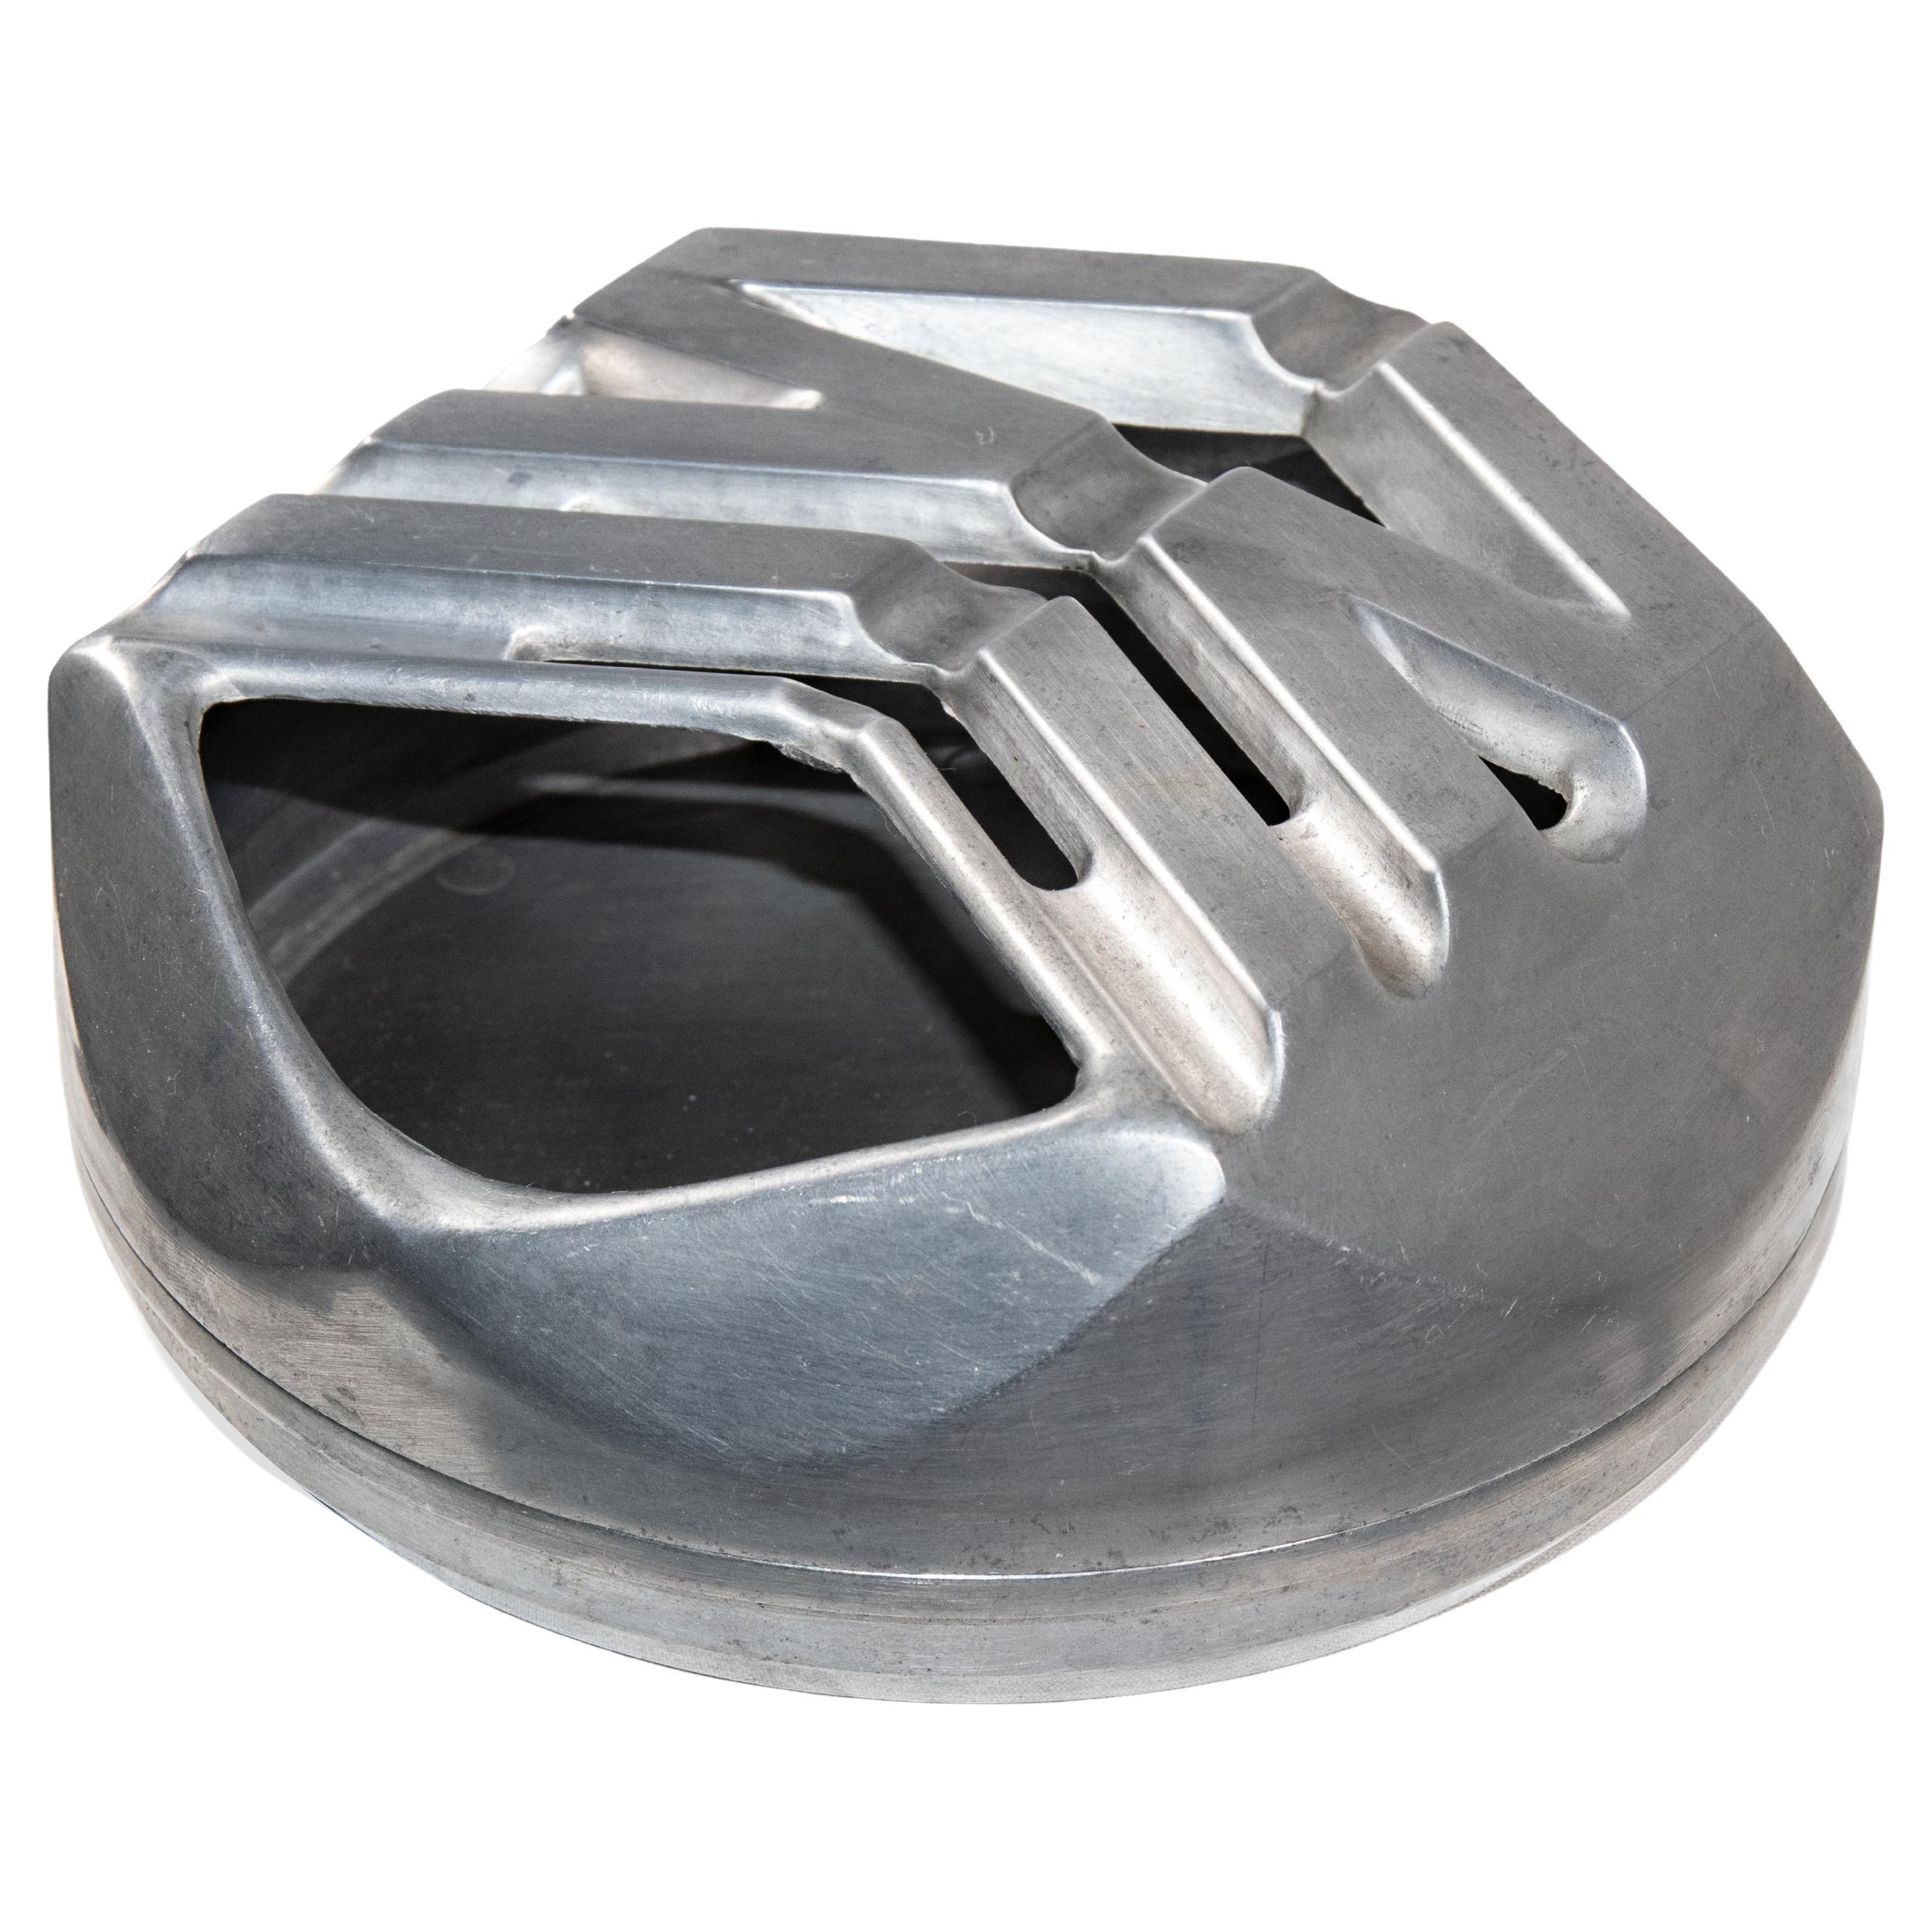 Solid and Machined Aluminum Apollo PN58 Ashtray by Sersterug Criant, 1960s For Sale